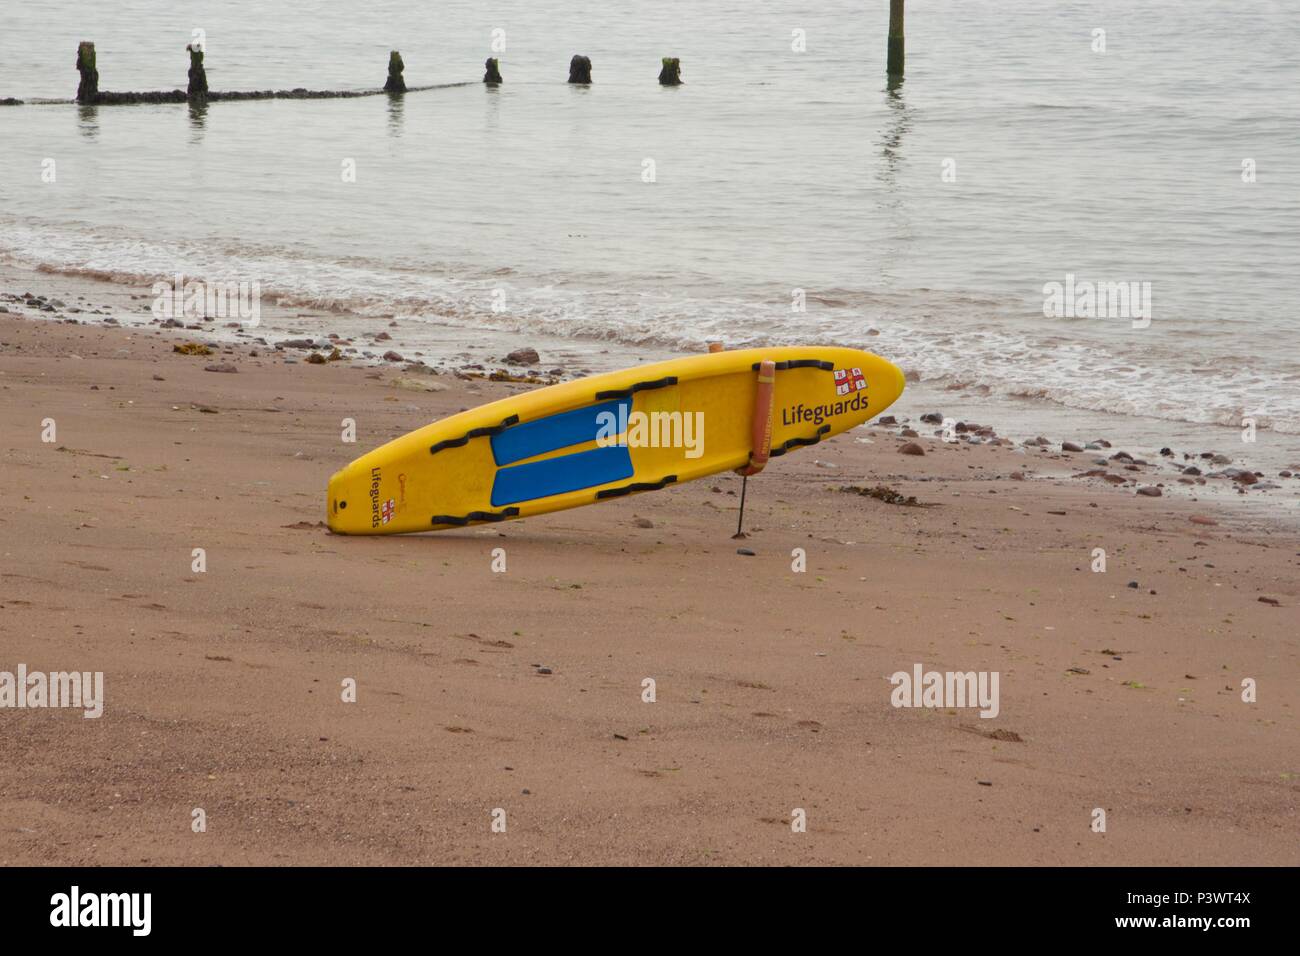 A RNLI lifeguard surf board propped up on the beach at Teignmouth, South Devon Stock Photo